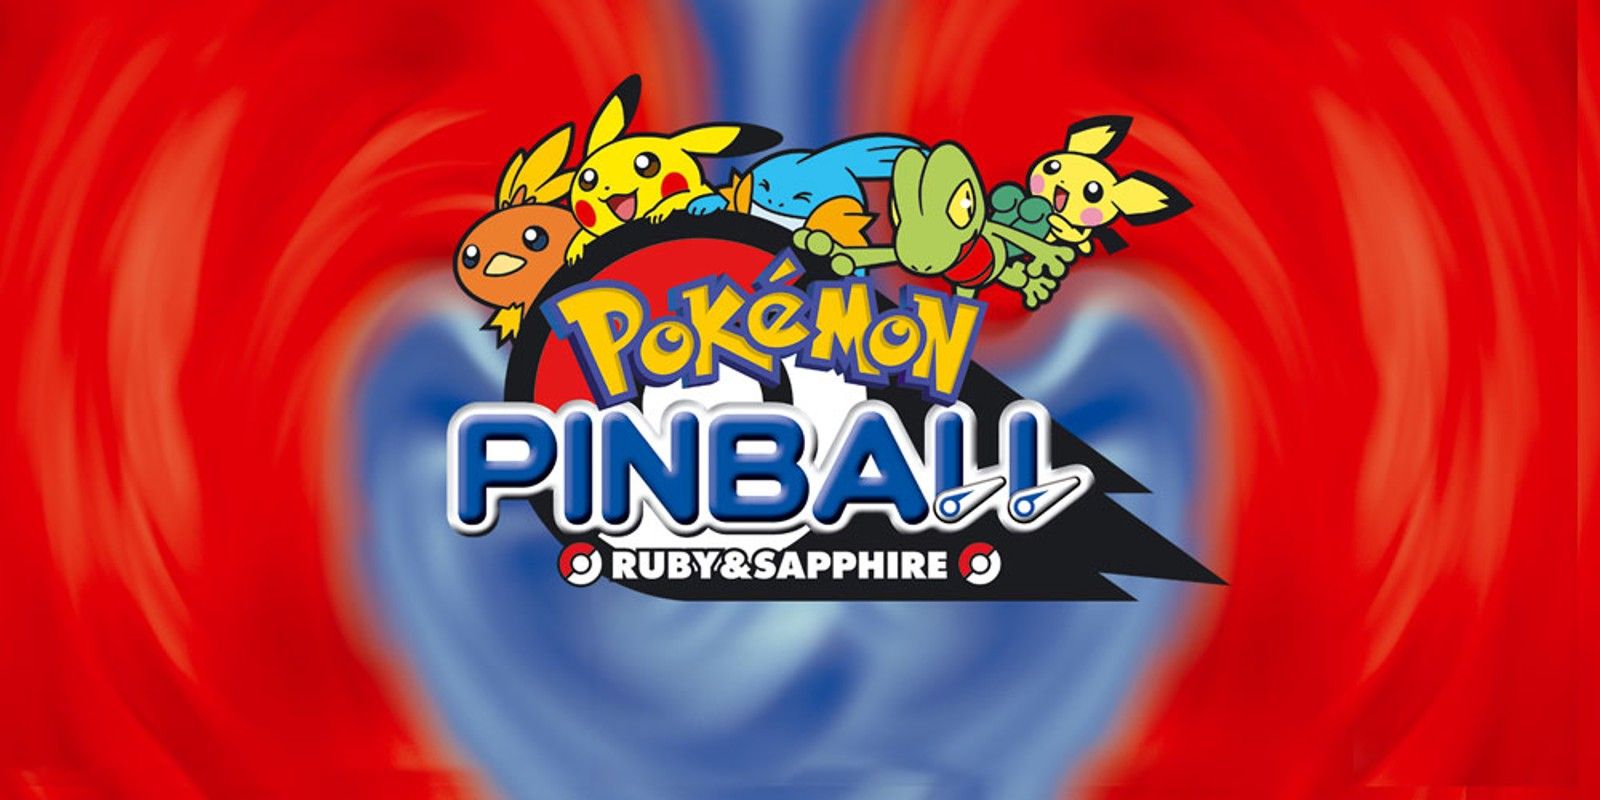 Poster art for Pokémon Pinball Ruby and Sapphire